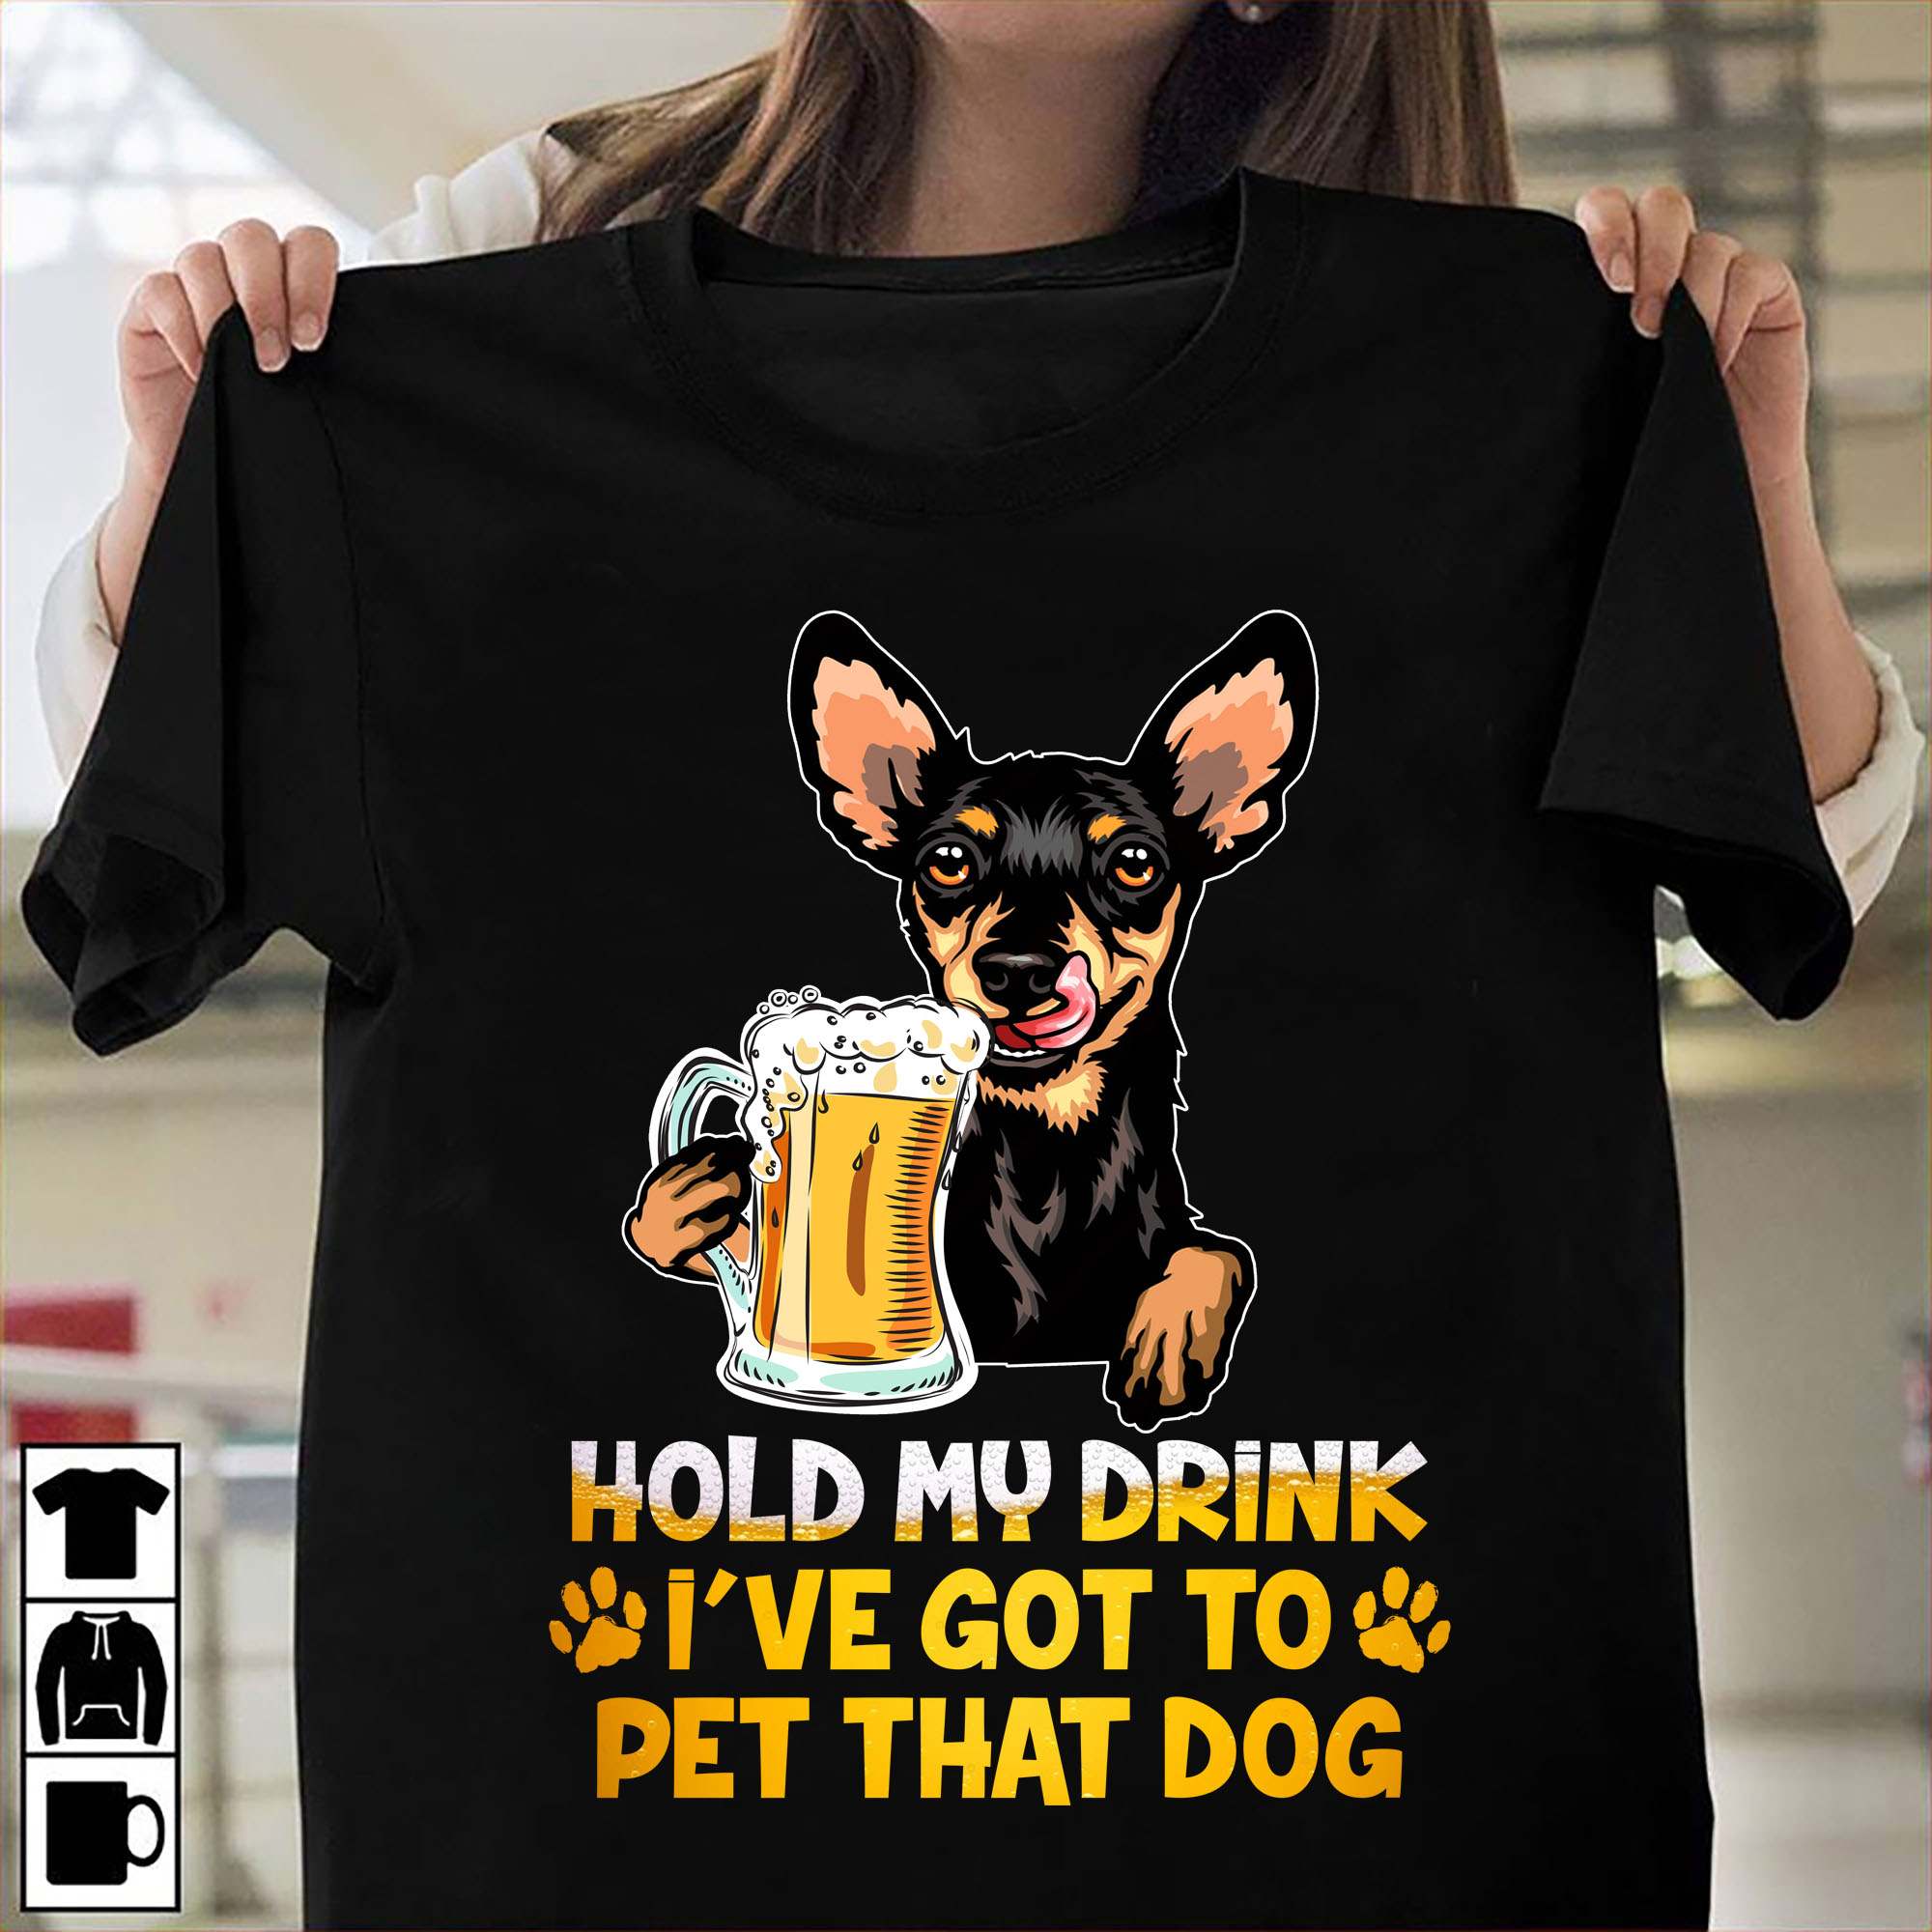 Hold my drink I've got to pet that dog - Chihuahua dog and beer